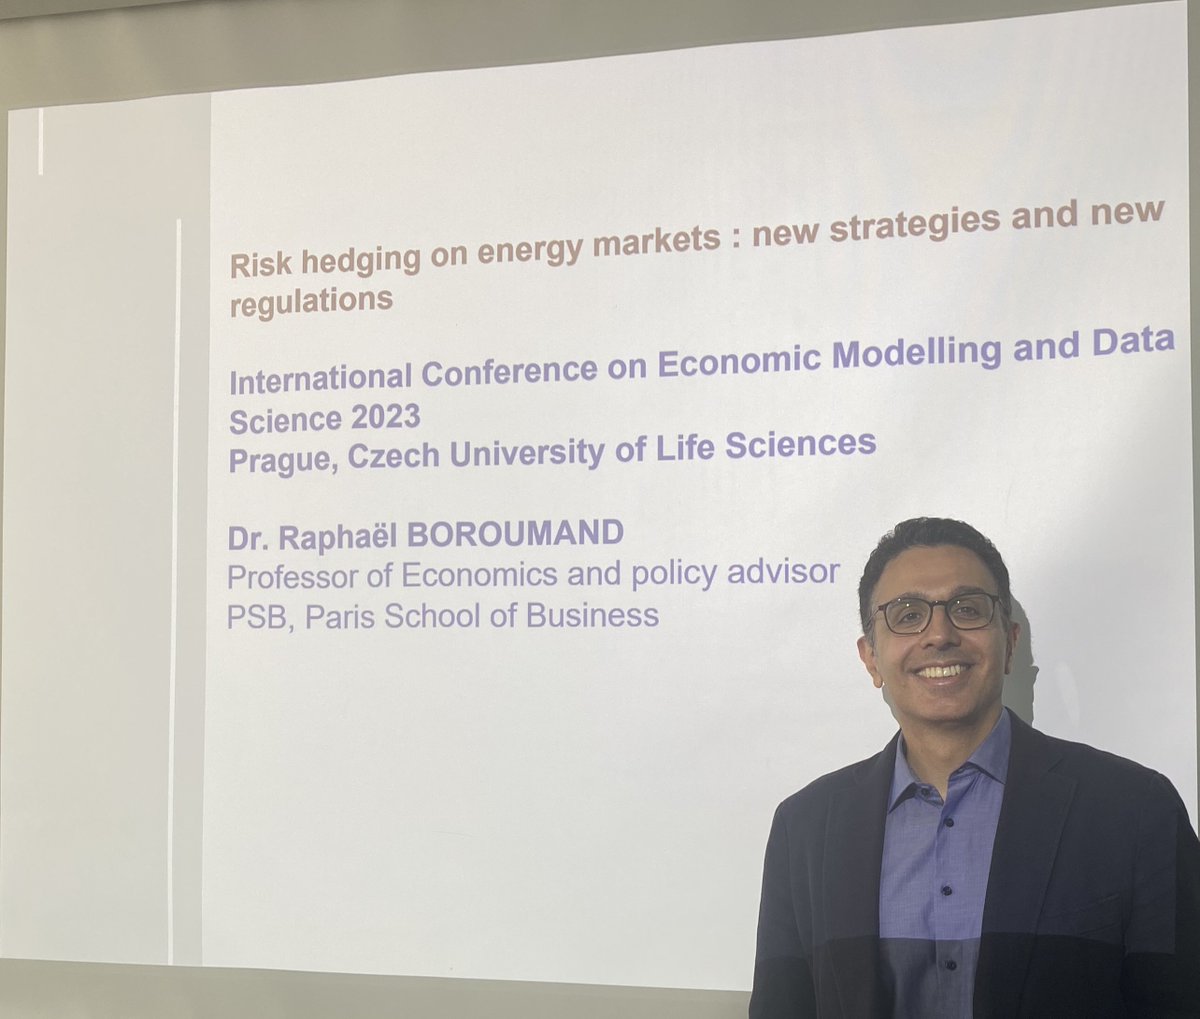 😉#Prague international #conference. I presented my #scientific publication to professors, researchers, and economists from all over the world at the 'International Conference on Economic #Modelling and #Data #Science'